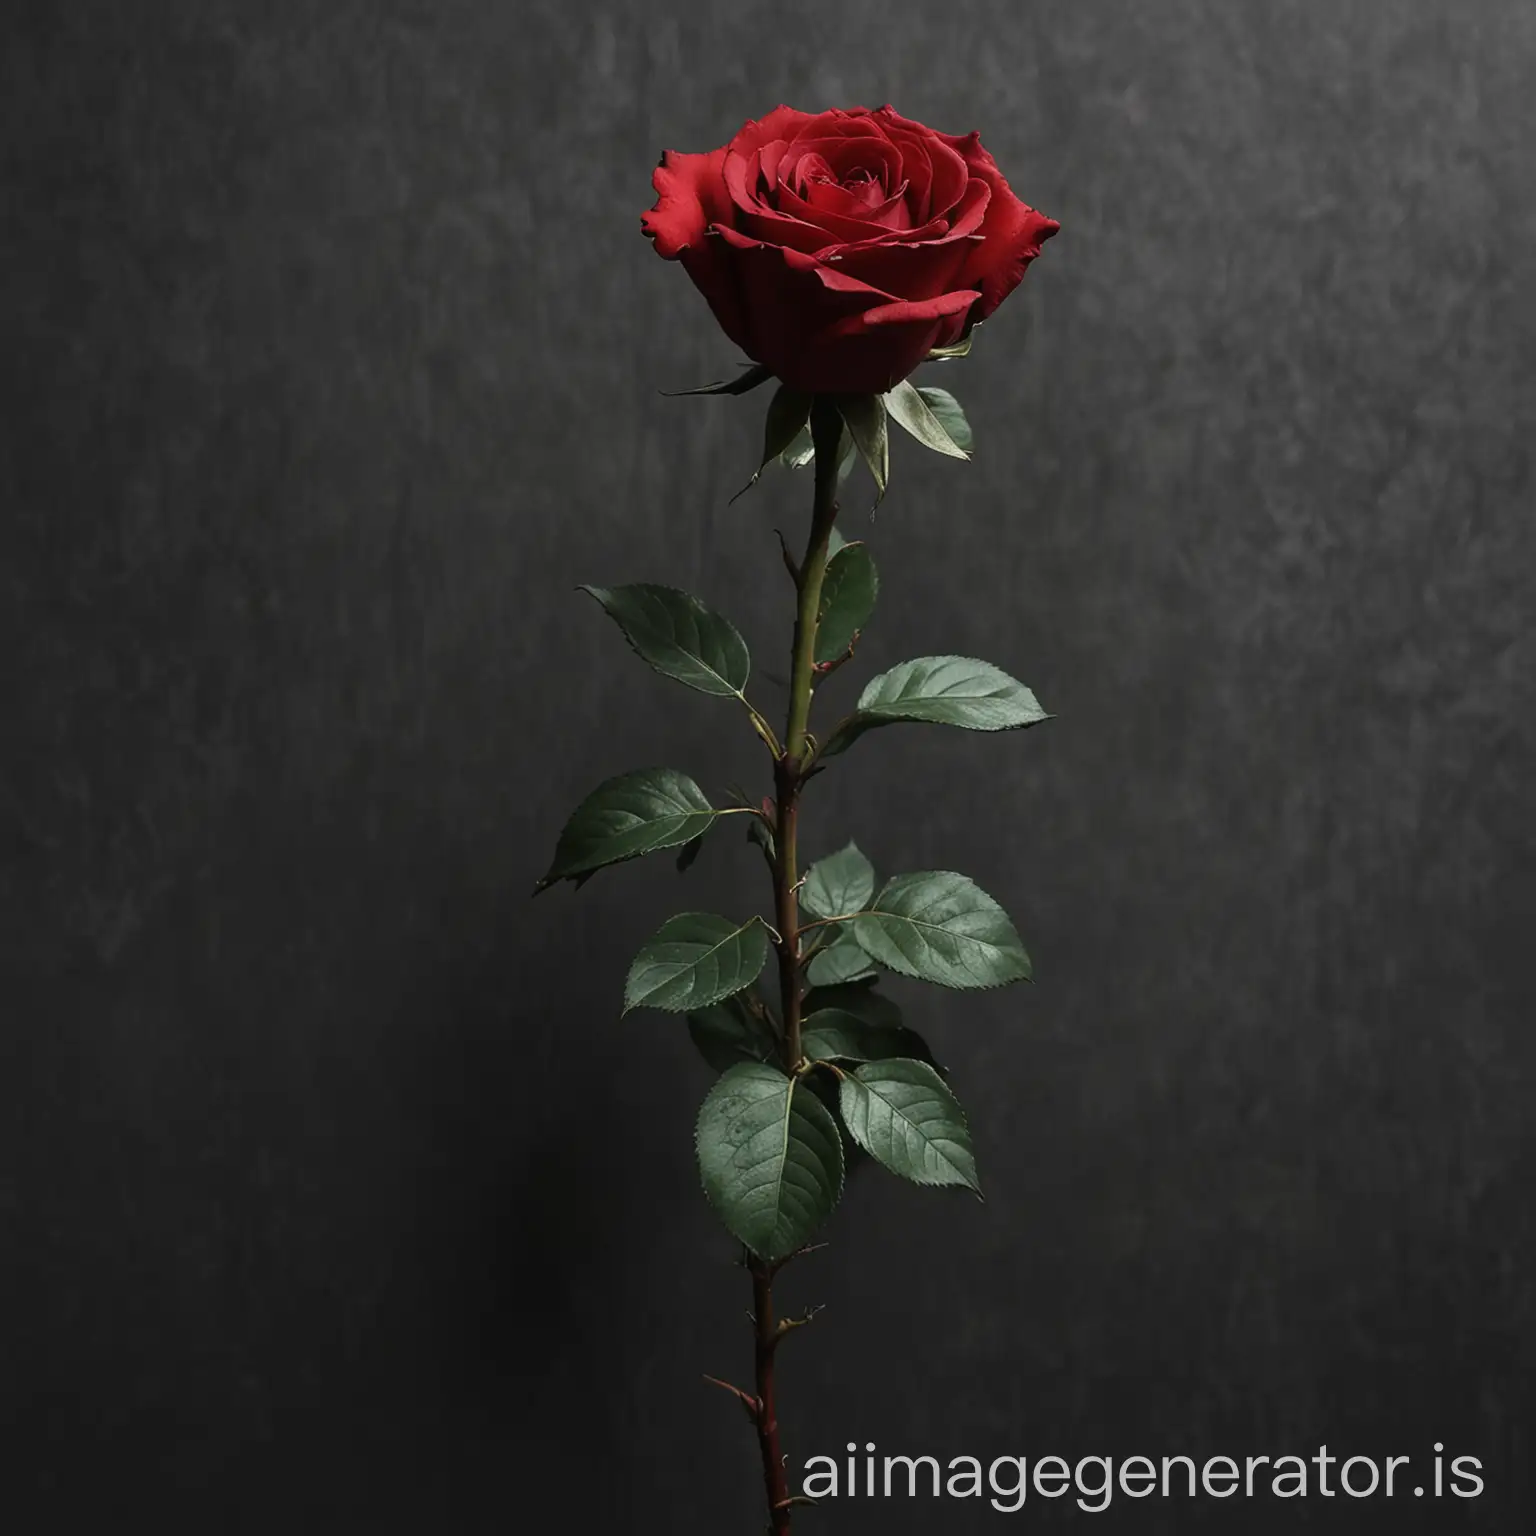 Red-Rose-on-Dark-Wall-Aesthetic-Romantic-Floral-Beauty-Against-Moody-Background